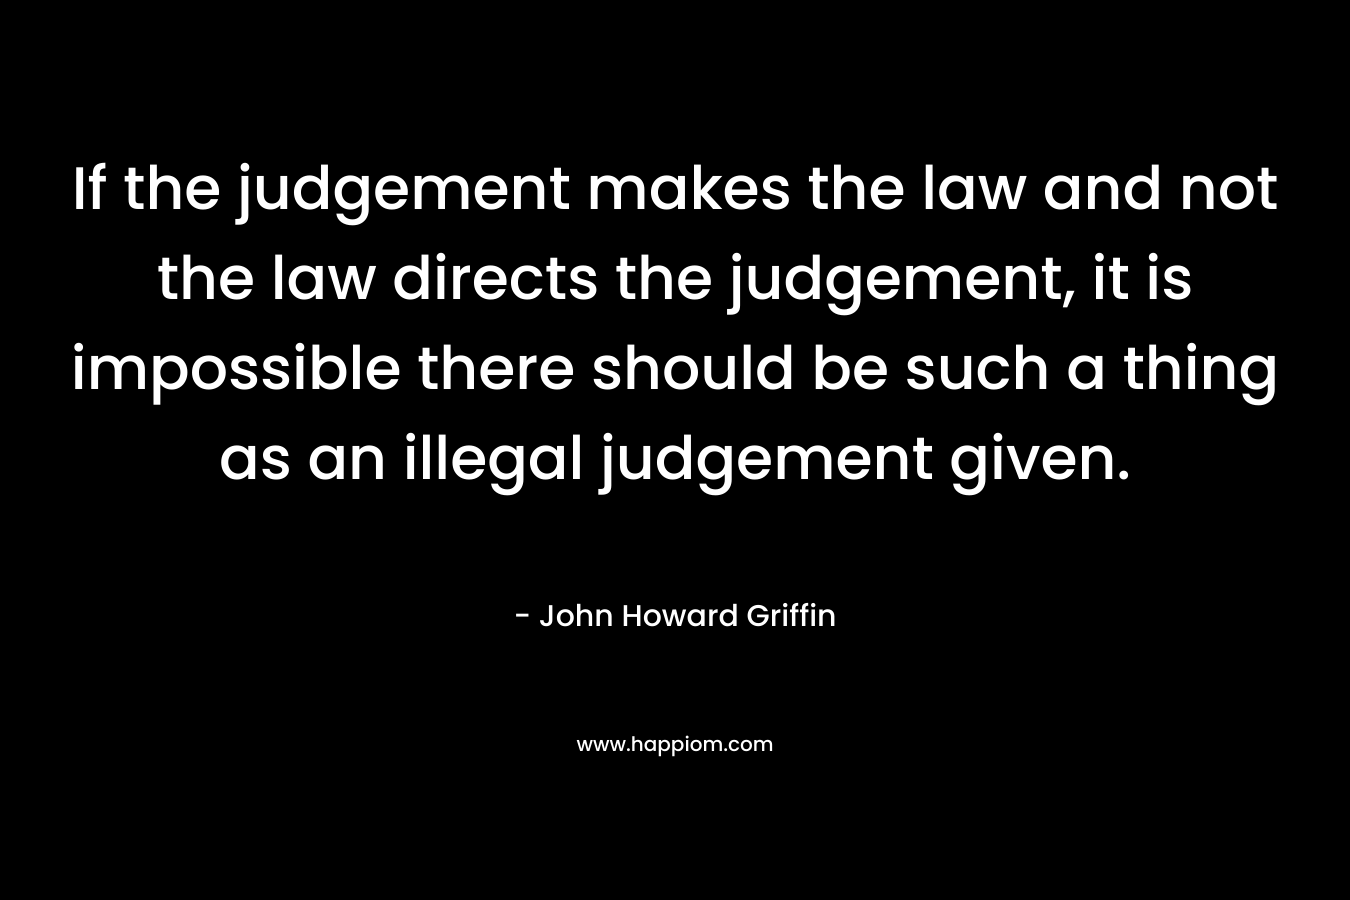 If the judgement makes the law and not the law directs the judgement, it is impossible there should be such a thing as an illegal judgement given.